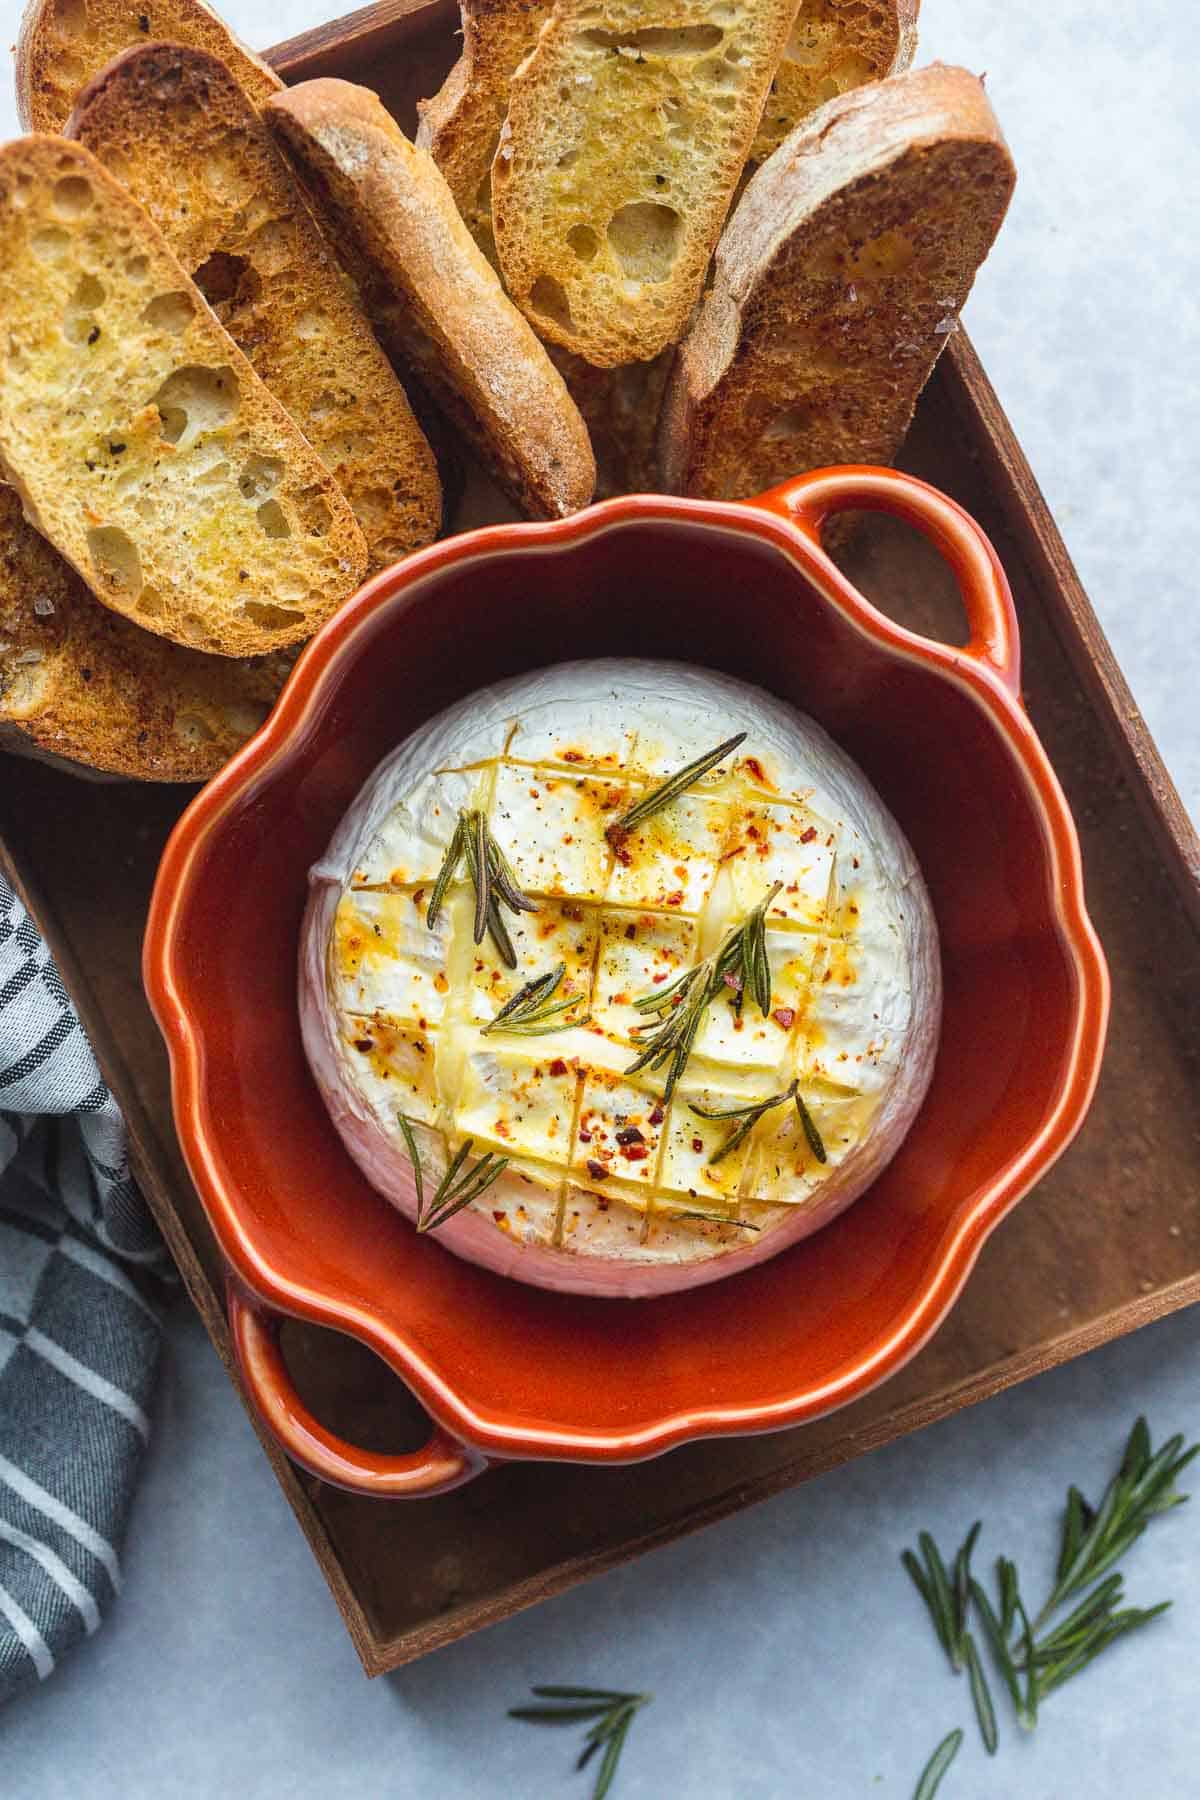 Baked Camembert served with toasted ciabatta bread